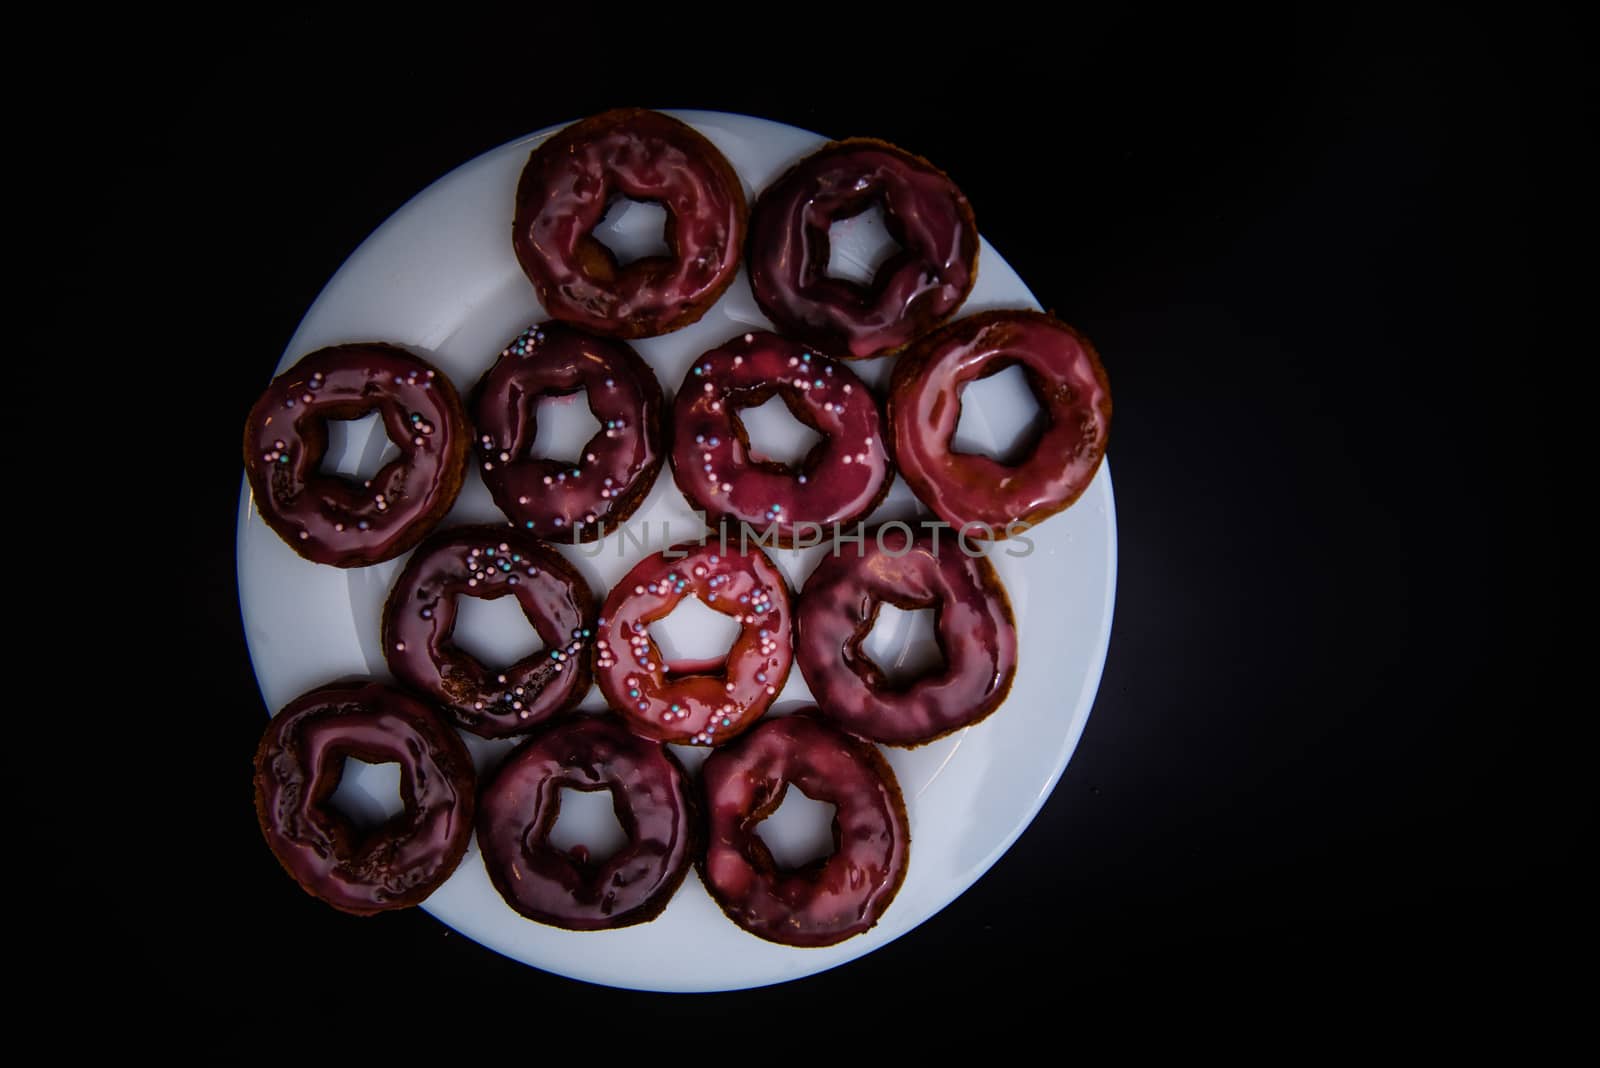 assorted donuts with chocolate frosted, pink glazed and sprinkles donuts on black background by marynkin